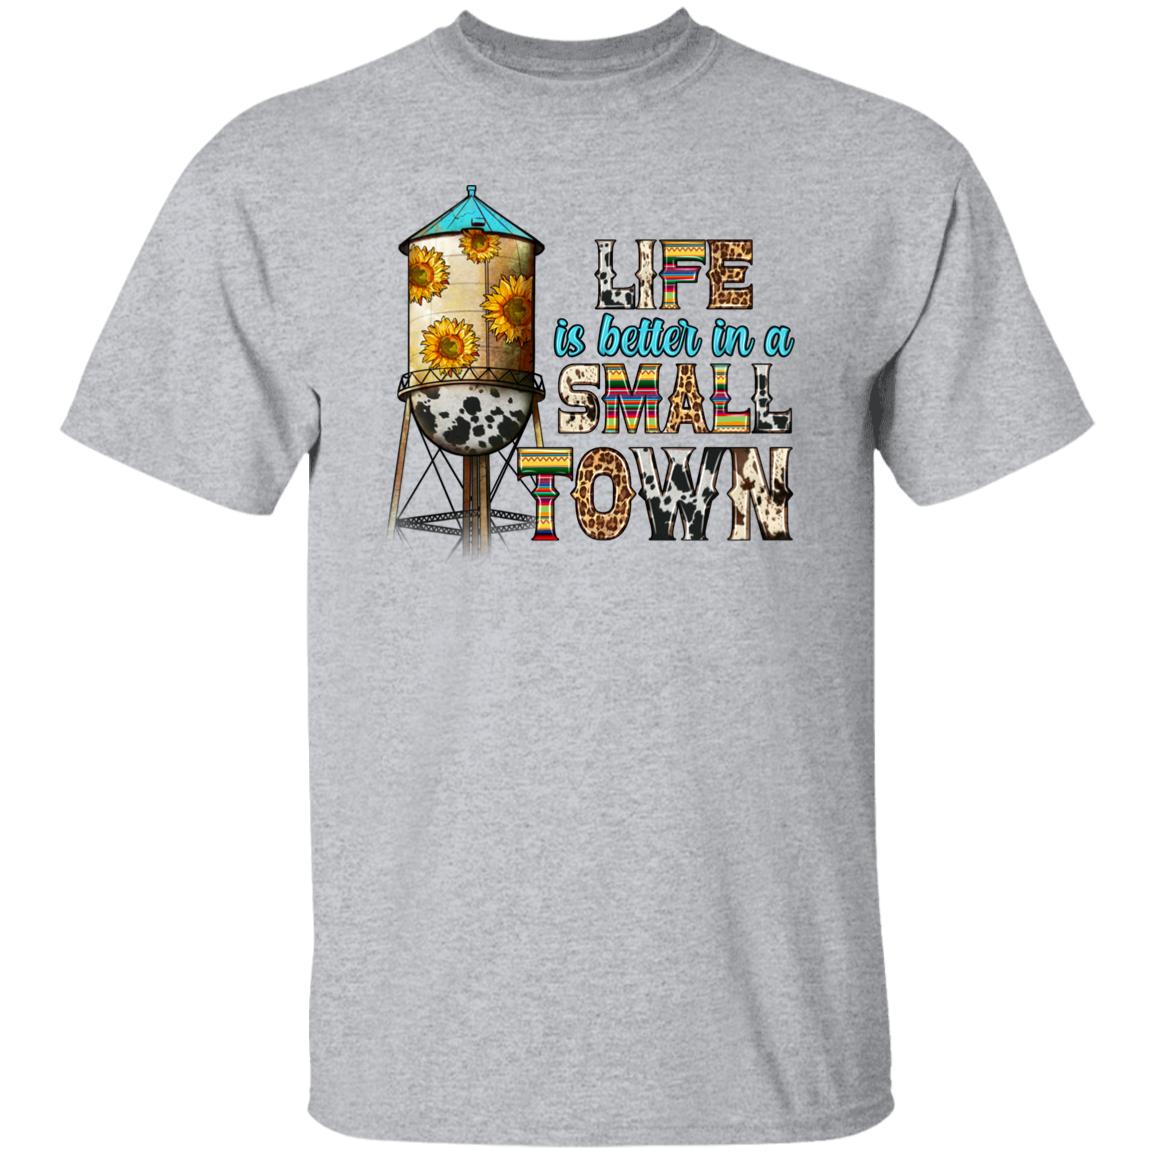 Life is better in a small town T-Shirt gift Western sunflowers small town girl Unisex Tee Sand White Sport Grey-Family-Gift-Planet